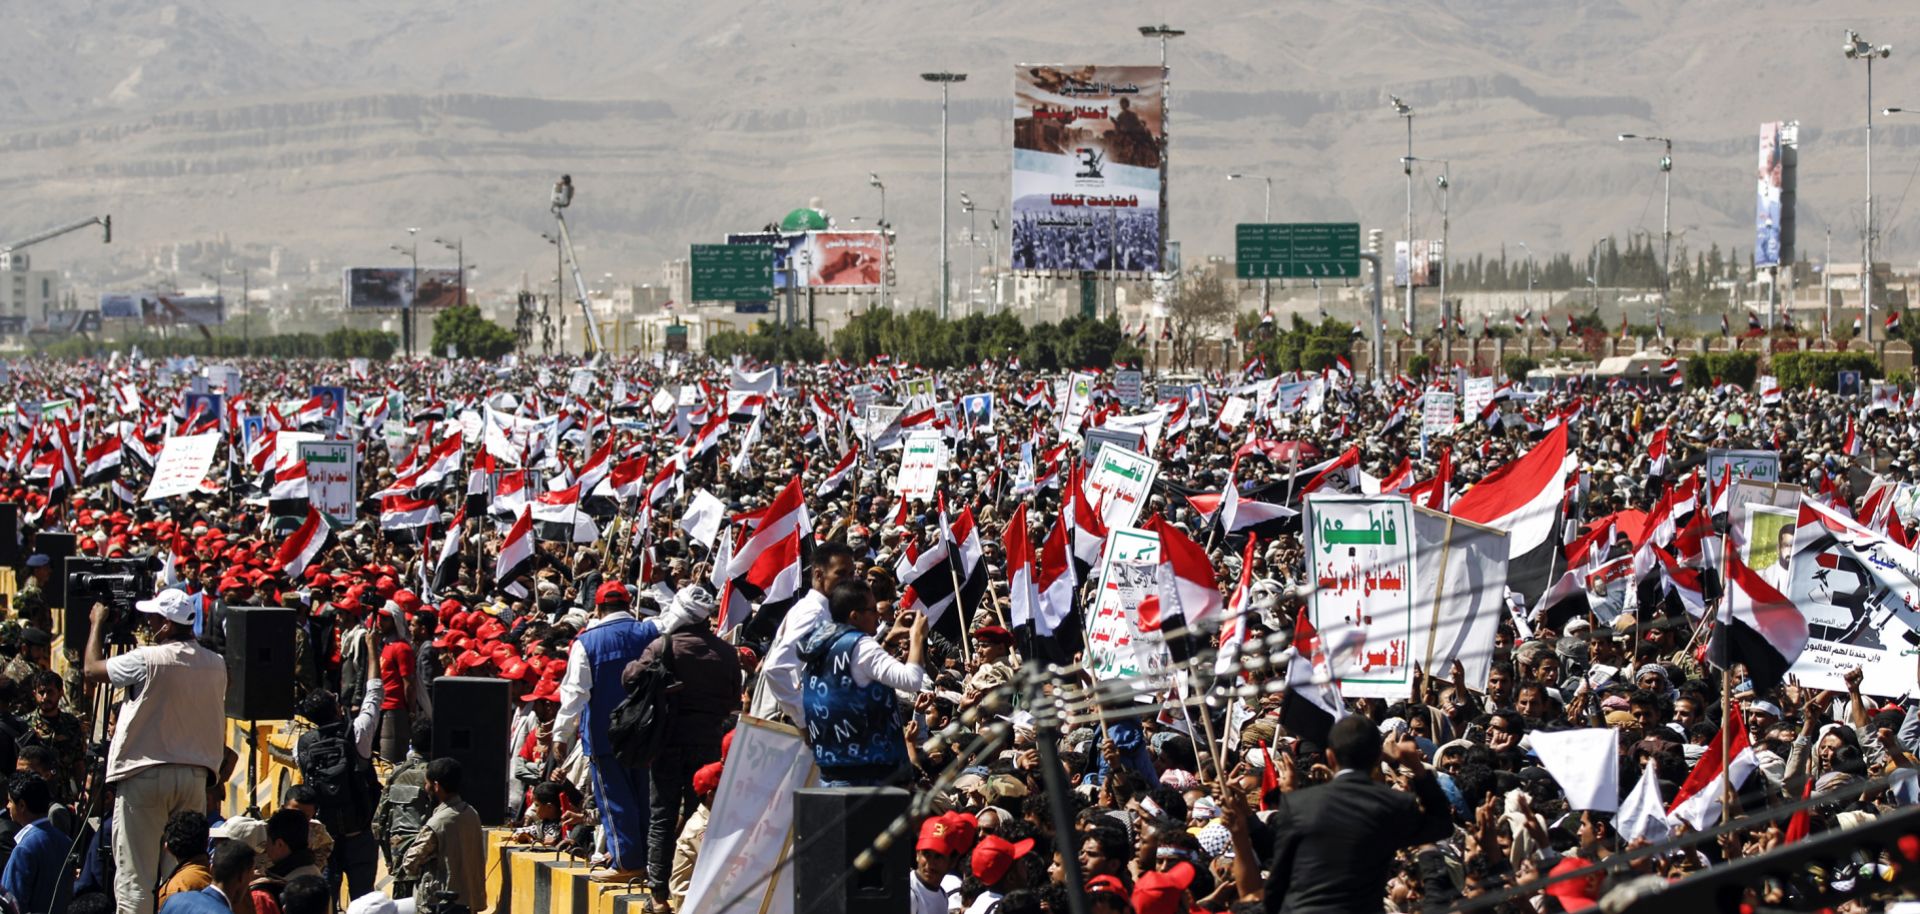 In the Yemeni capital of Sanaa, supporters of the Houthi insurgency gather March 26 at a rally commemorating the anniversary of Saudi Arabia's intervention in Yemen's civil war. 